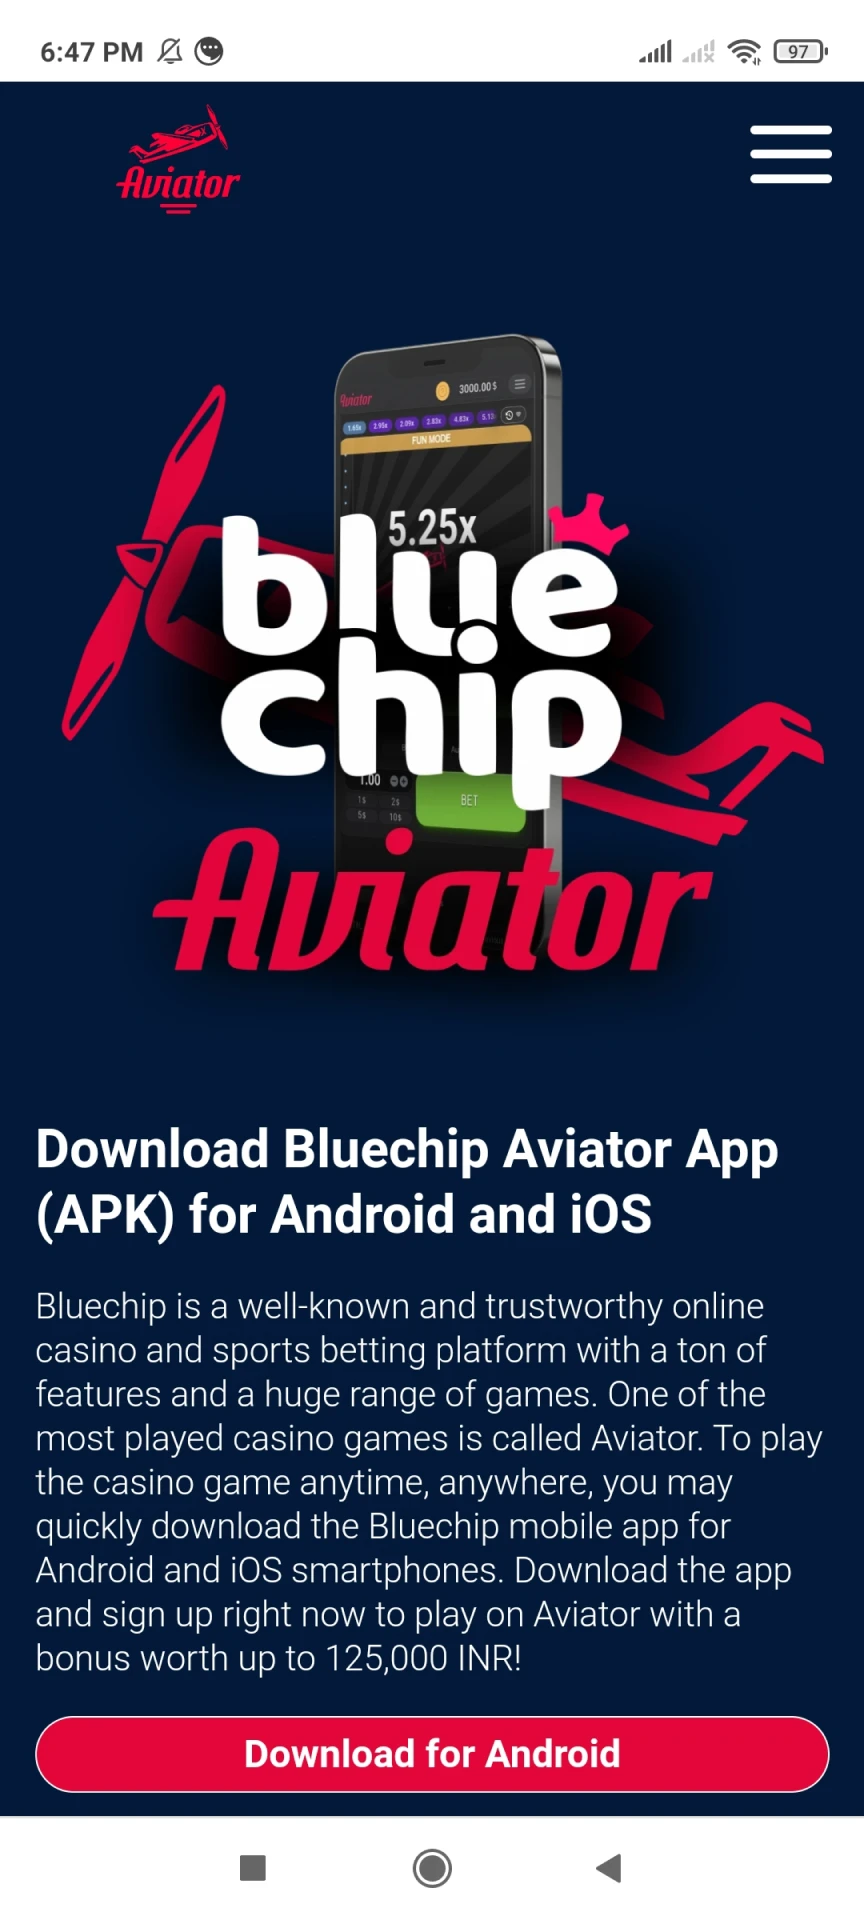 Follow the link to download the Bluechip app.